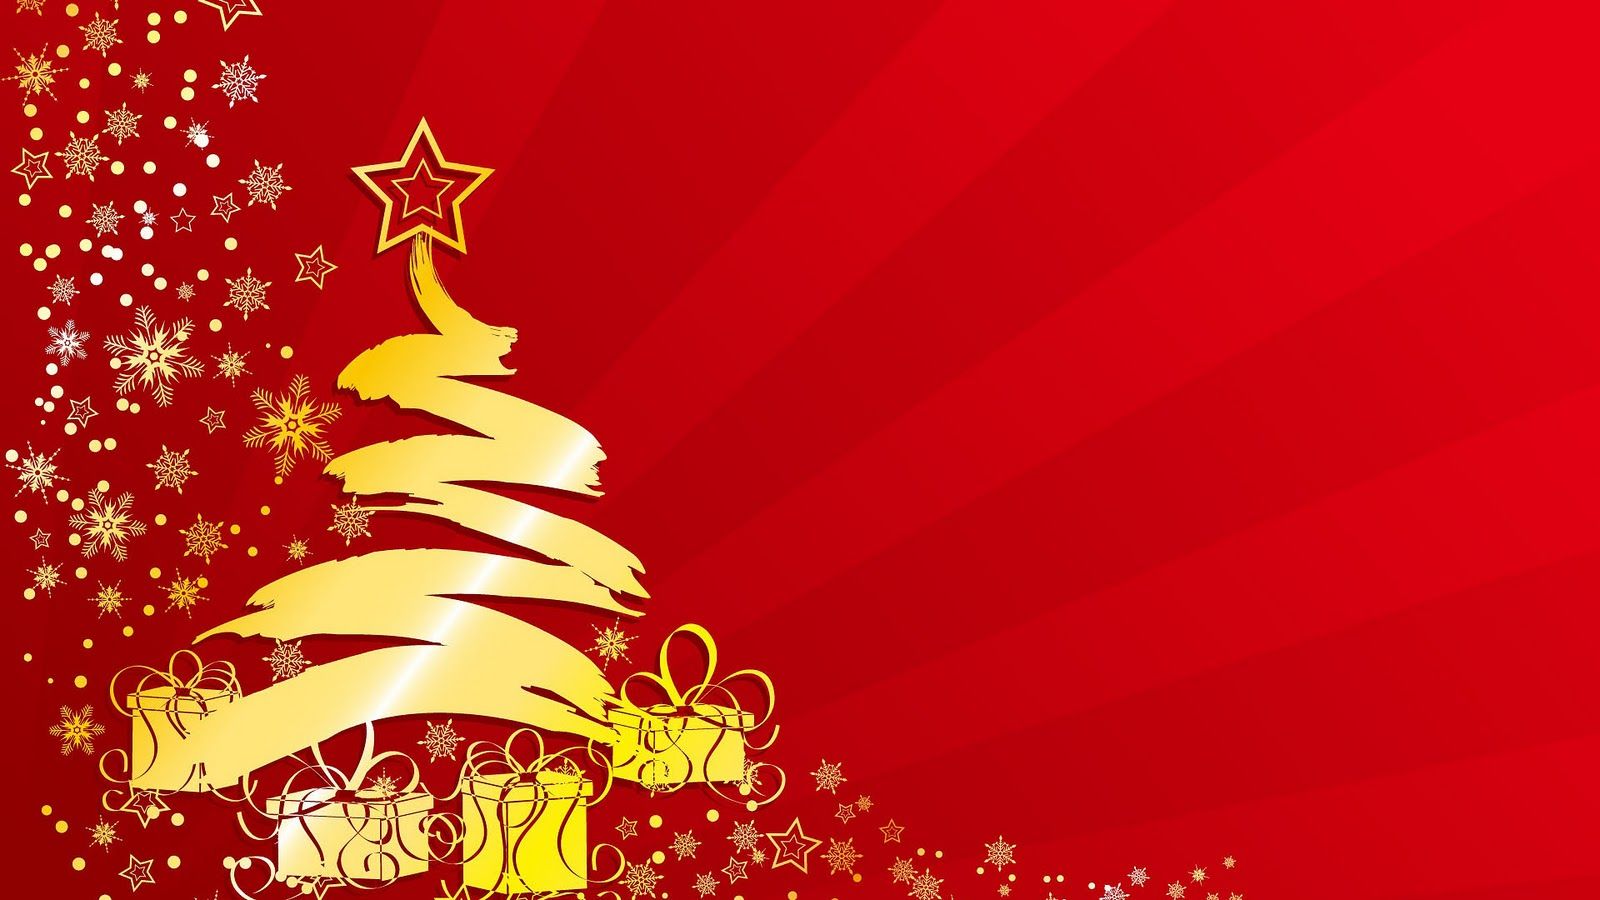 christian christmas wallpapers backgrounds #22